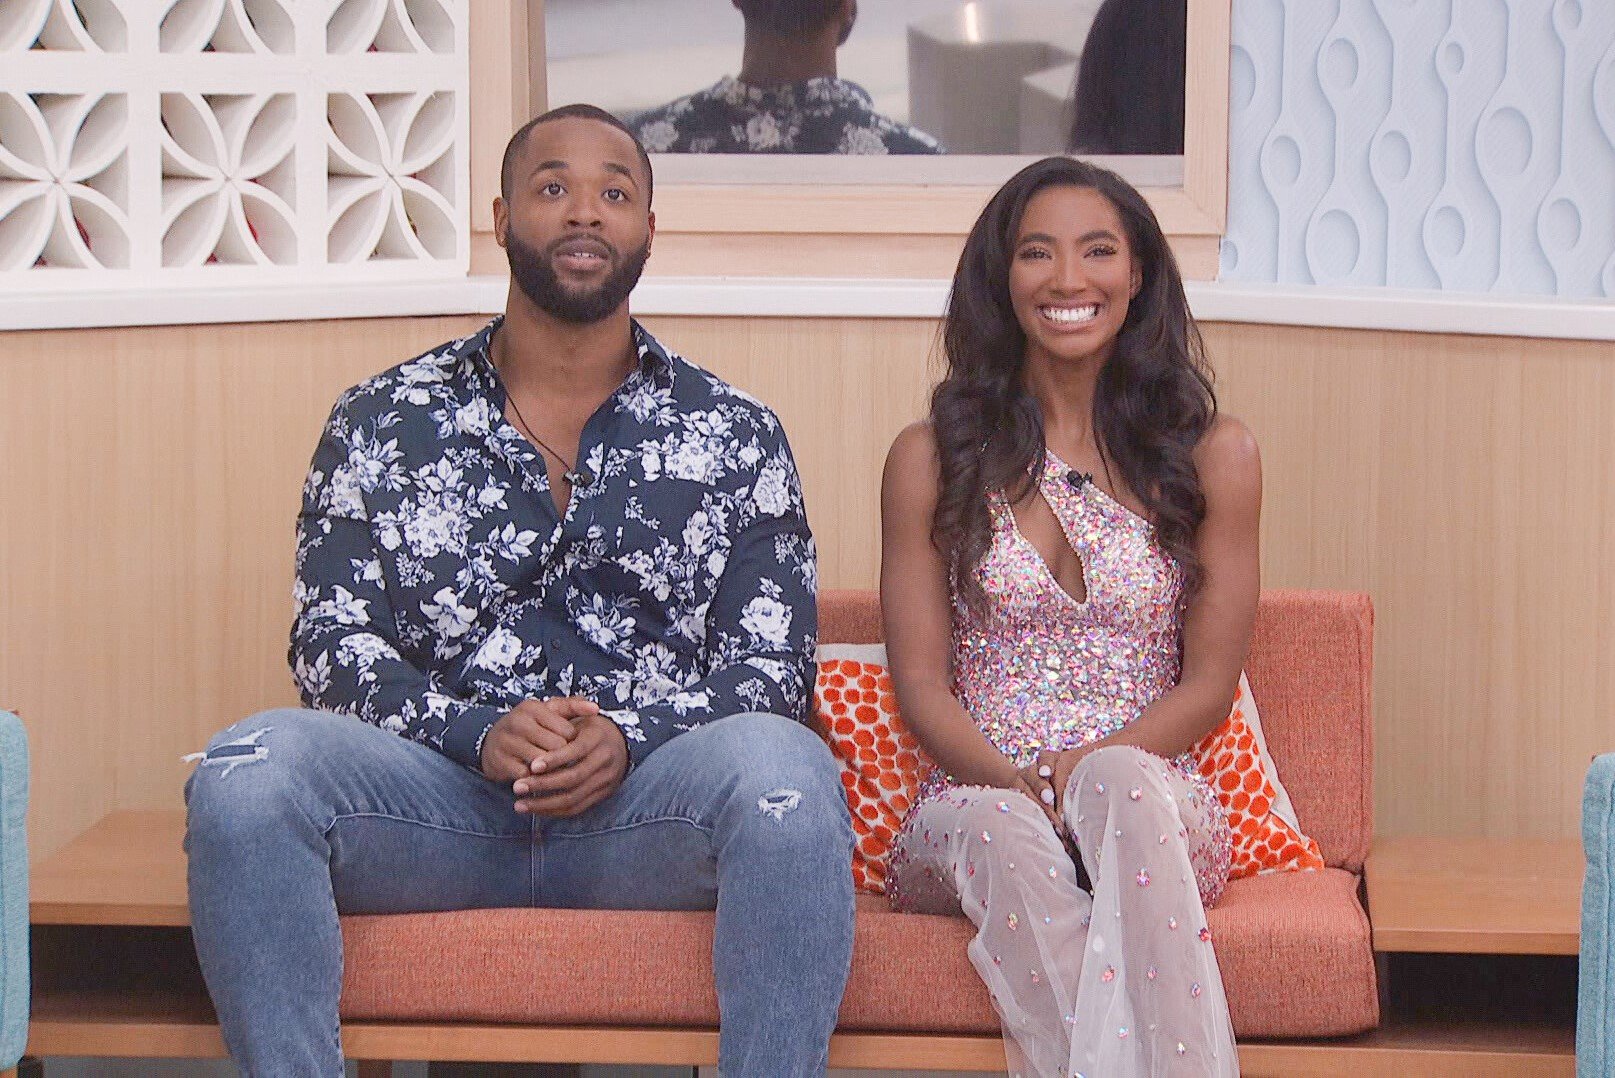 Monte Taylor and Taylor Hale, who starred in 'Big Brother 24' on CBS, sit in the final two chairs. Monte wears a dark blue long-sleeved button-up shirt and jeans. Taylor wears a light pink bejeweled jumpsuit.